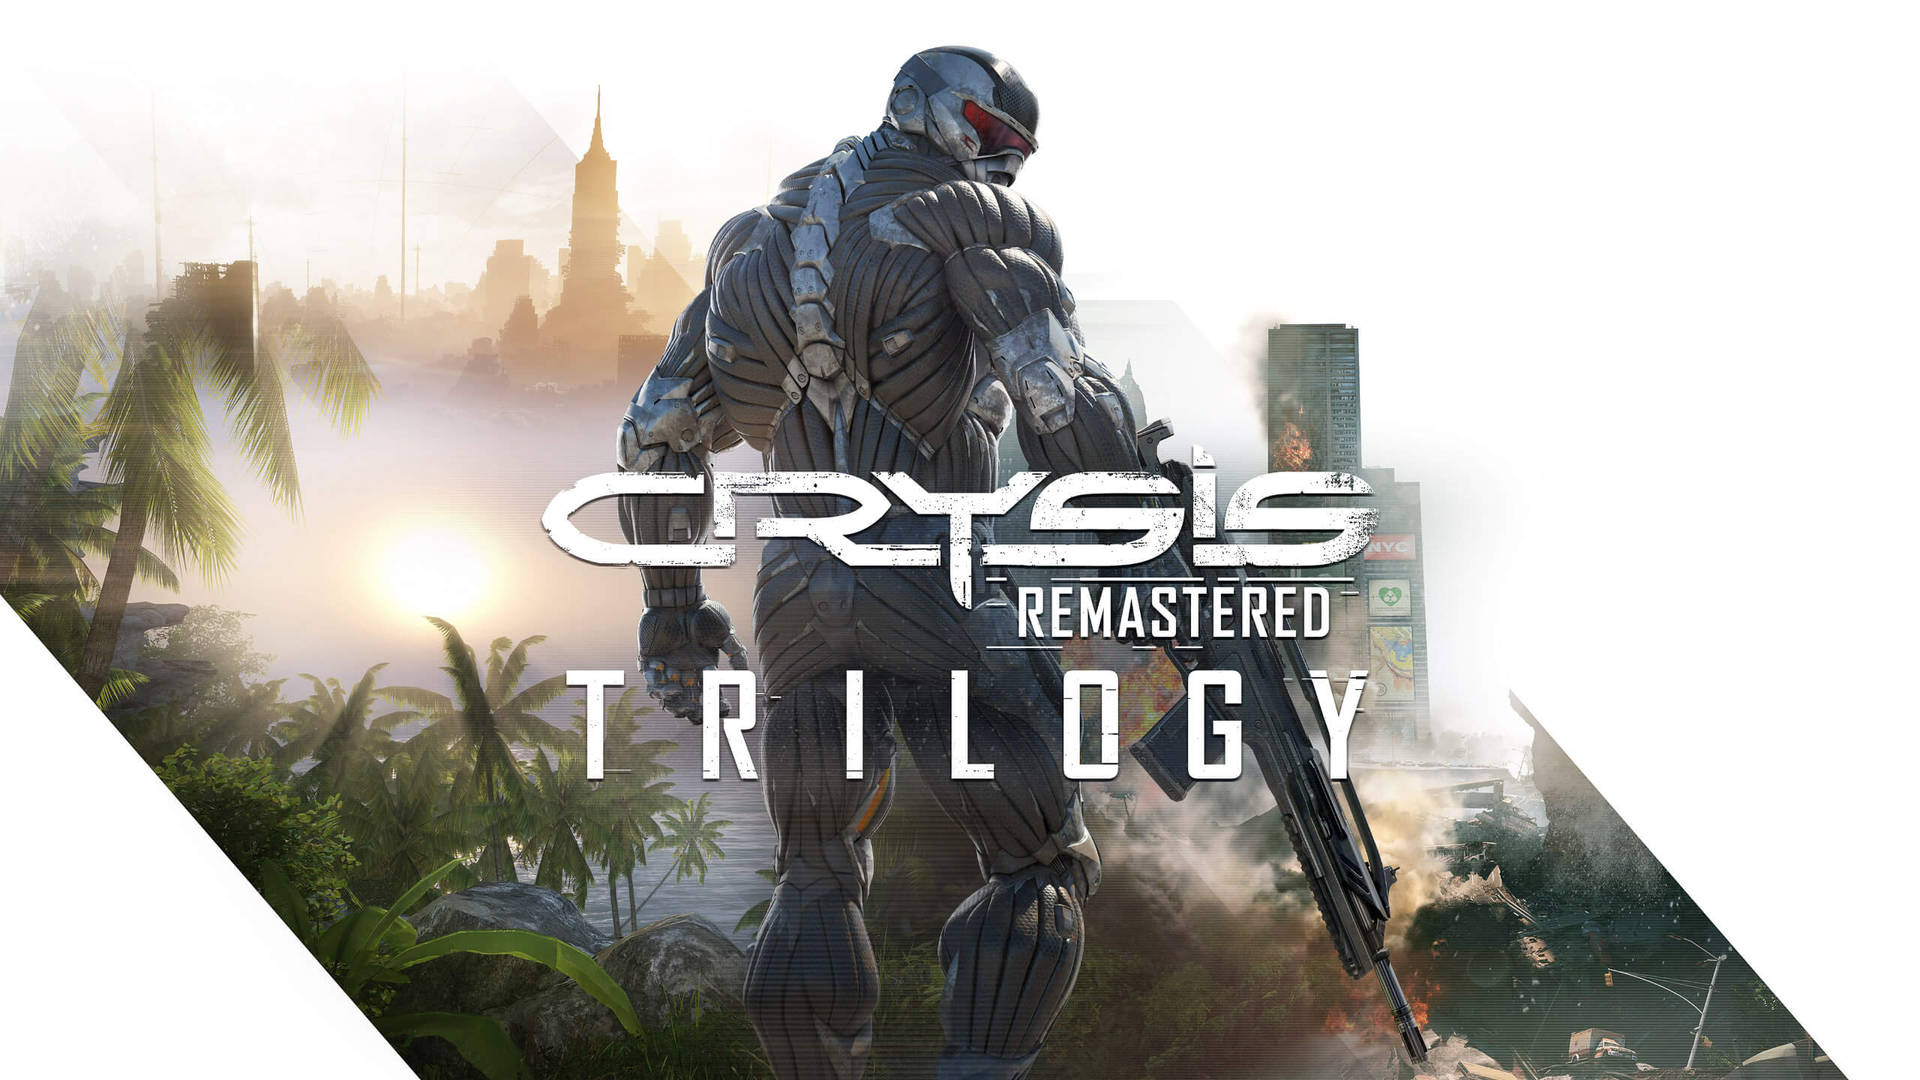 An intense frame from Crysis Remastered featuring high-quality gameplay graphics. Wallpaper